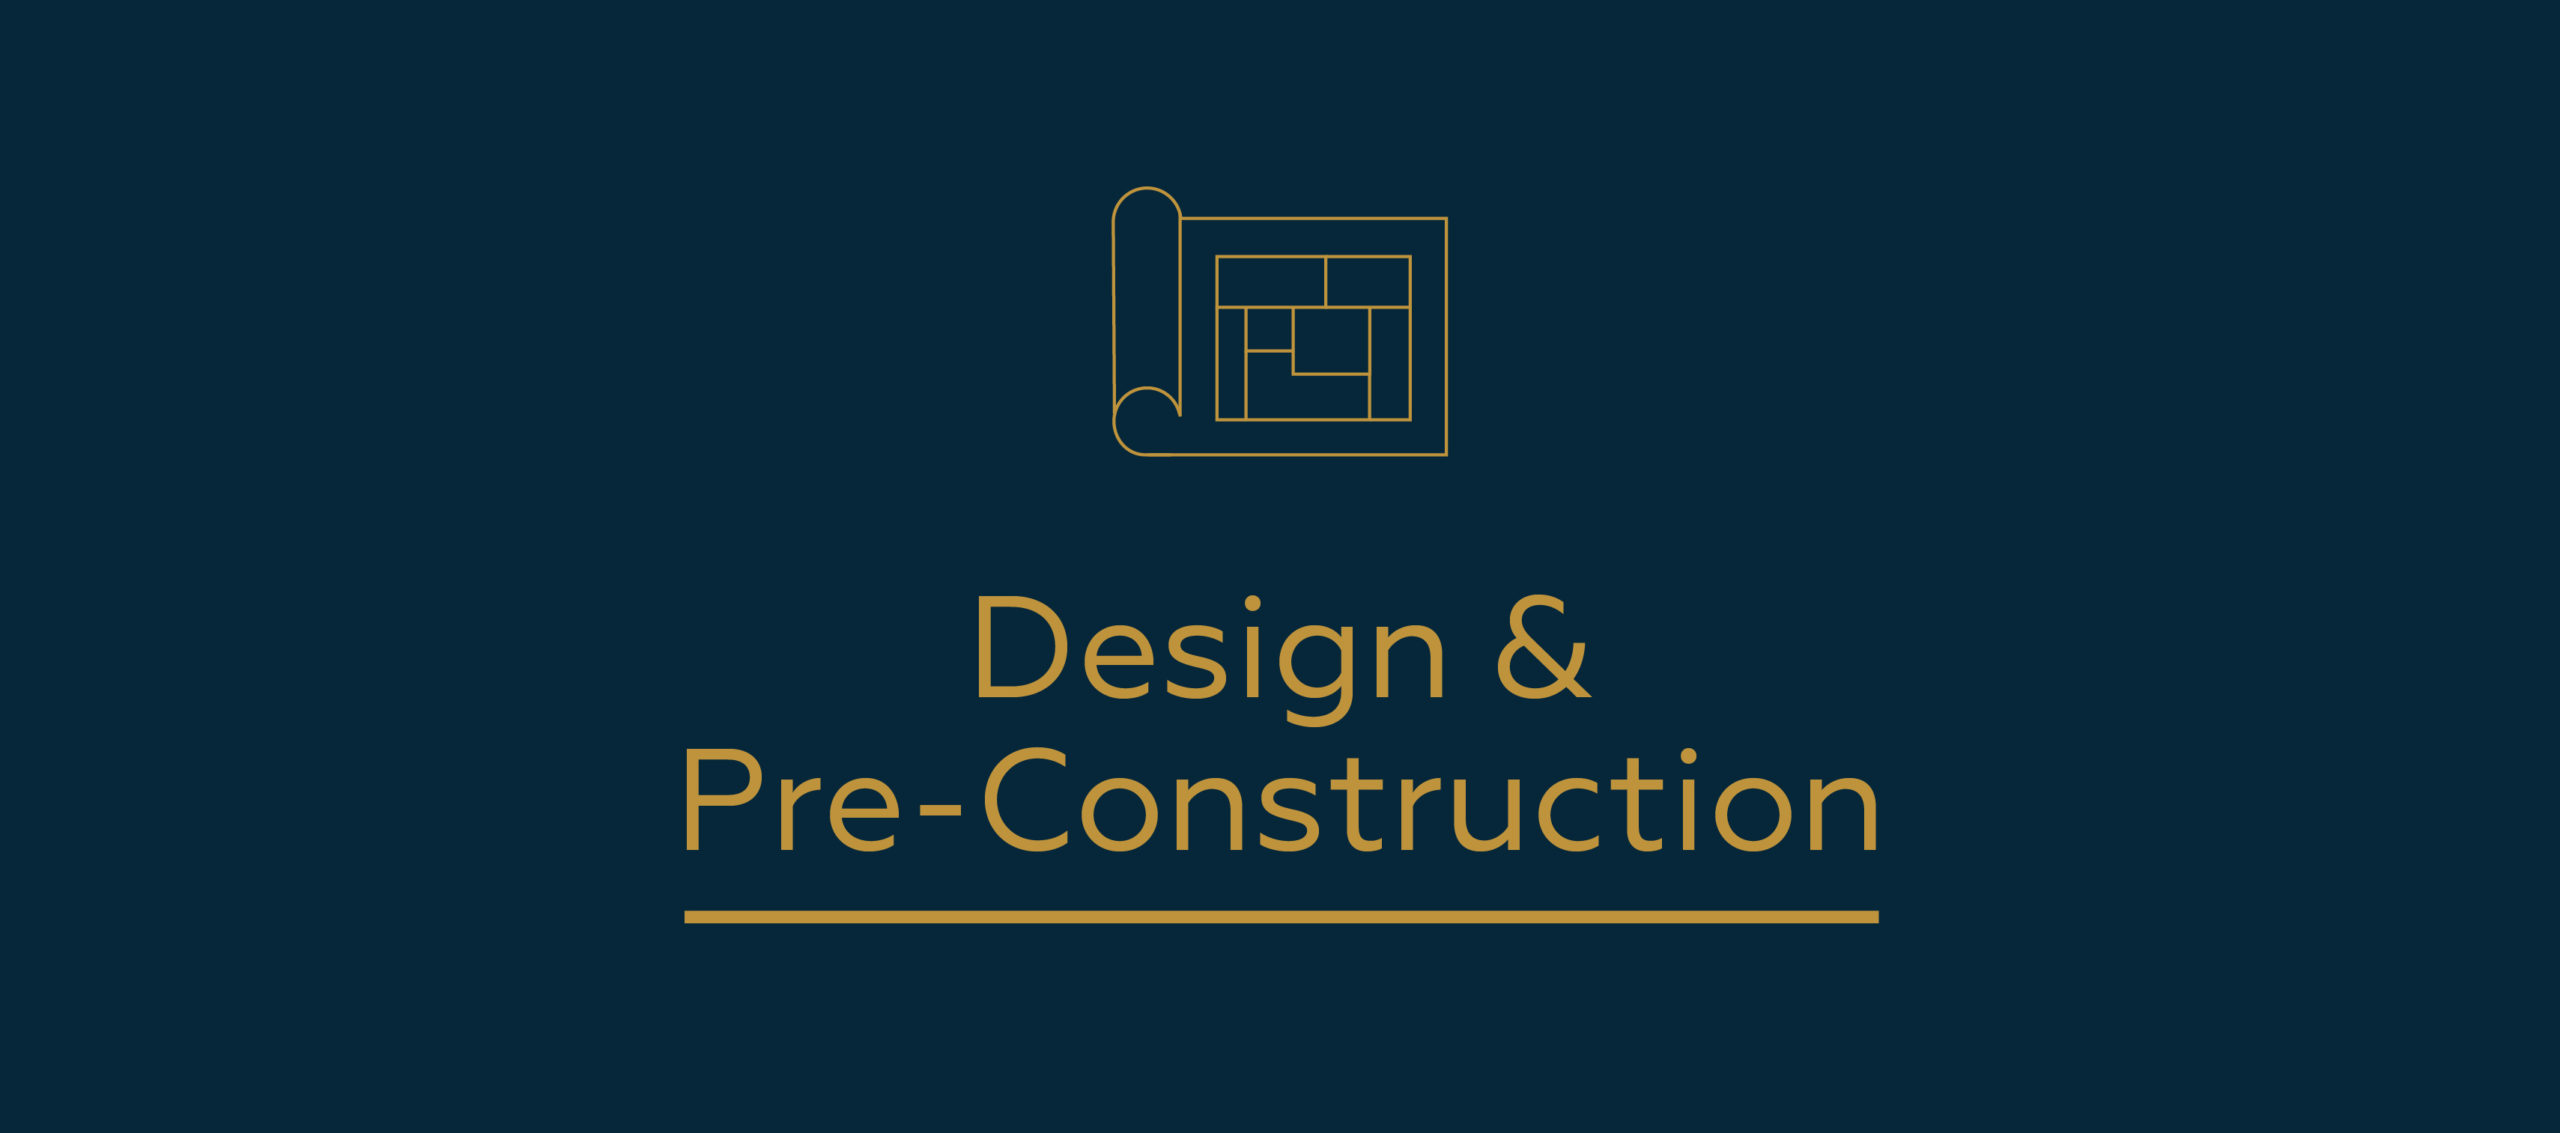 Building a Home: Start to Finish Series - Part 3: Design & Pre-Construction 1